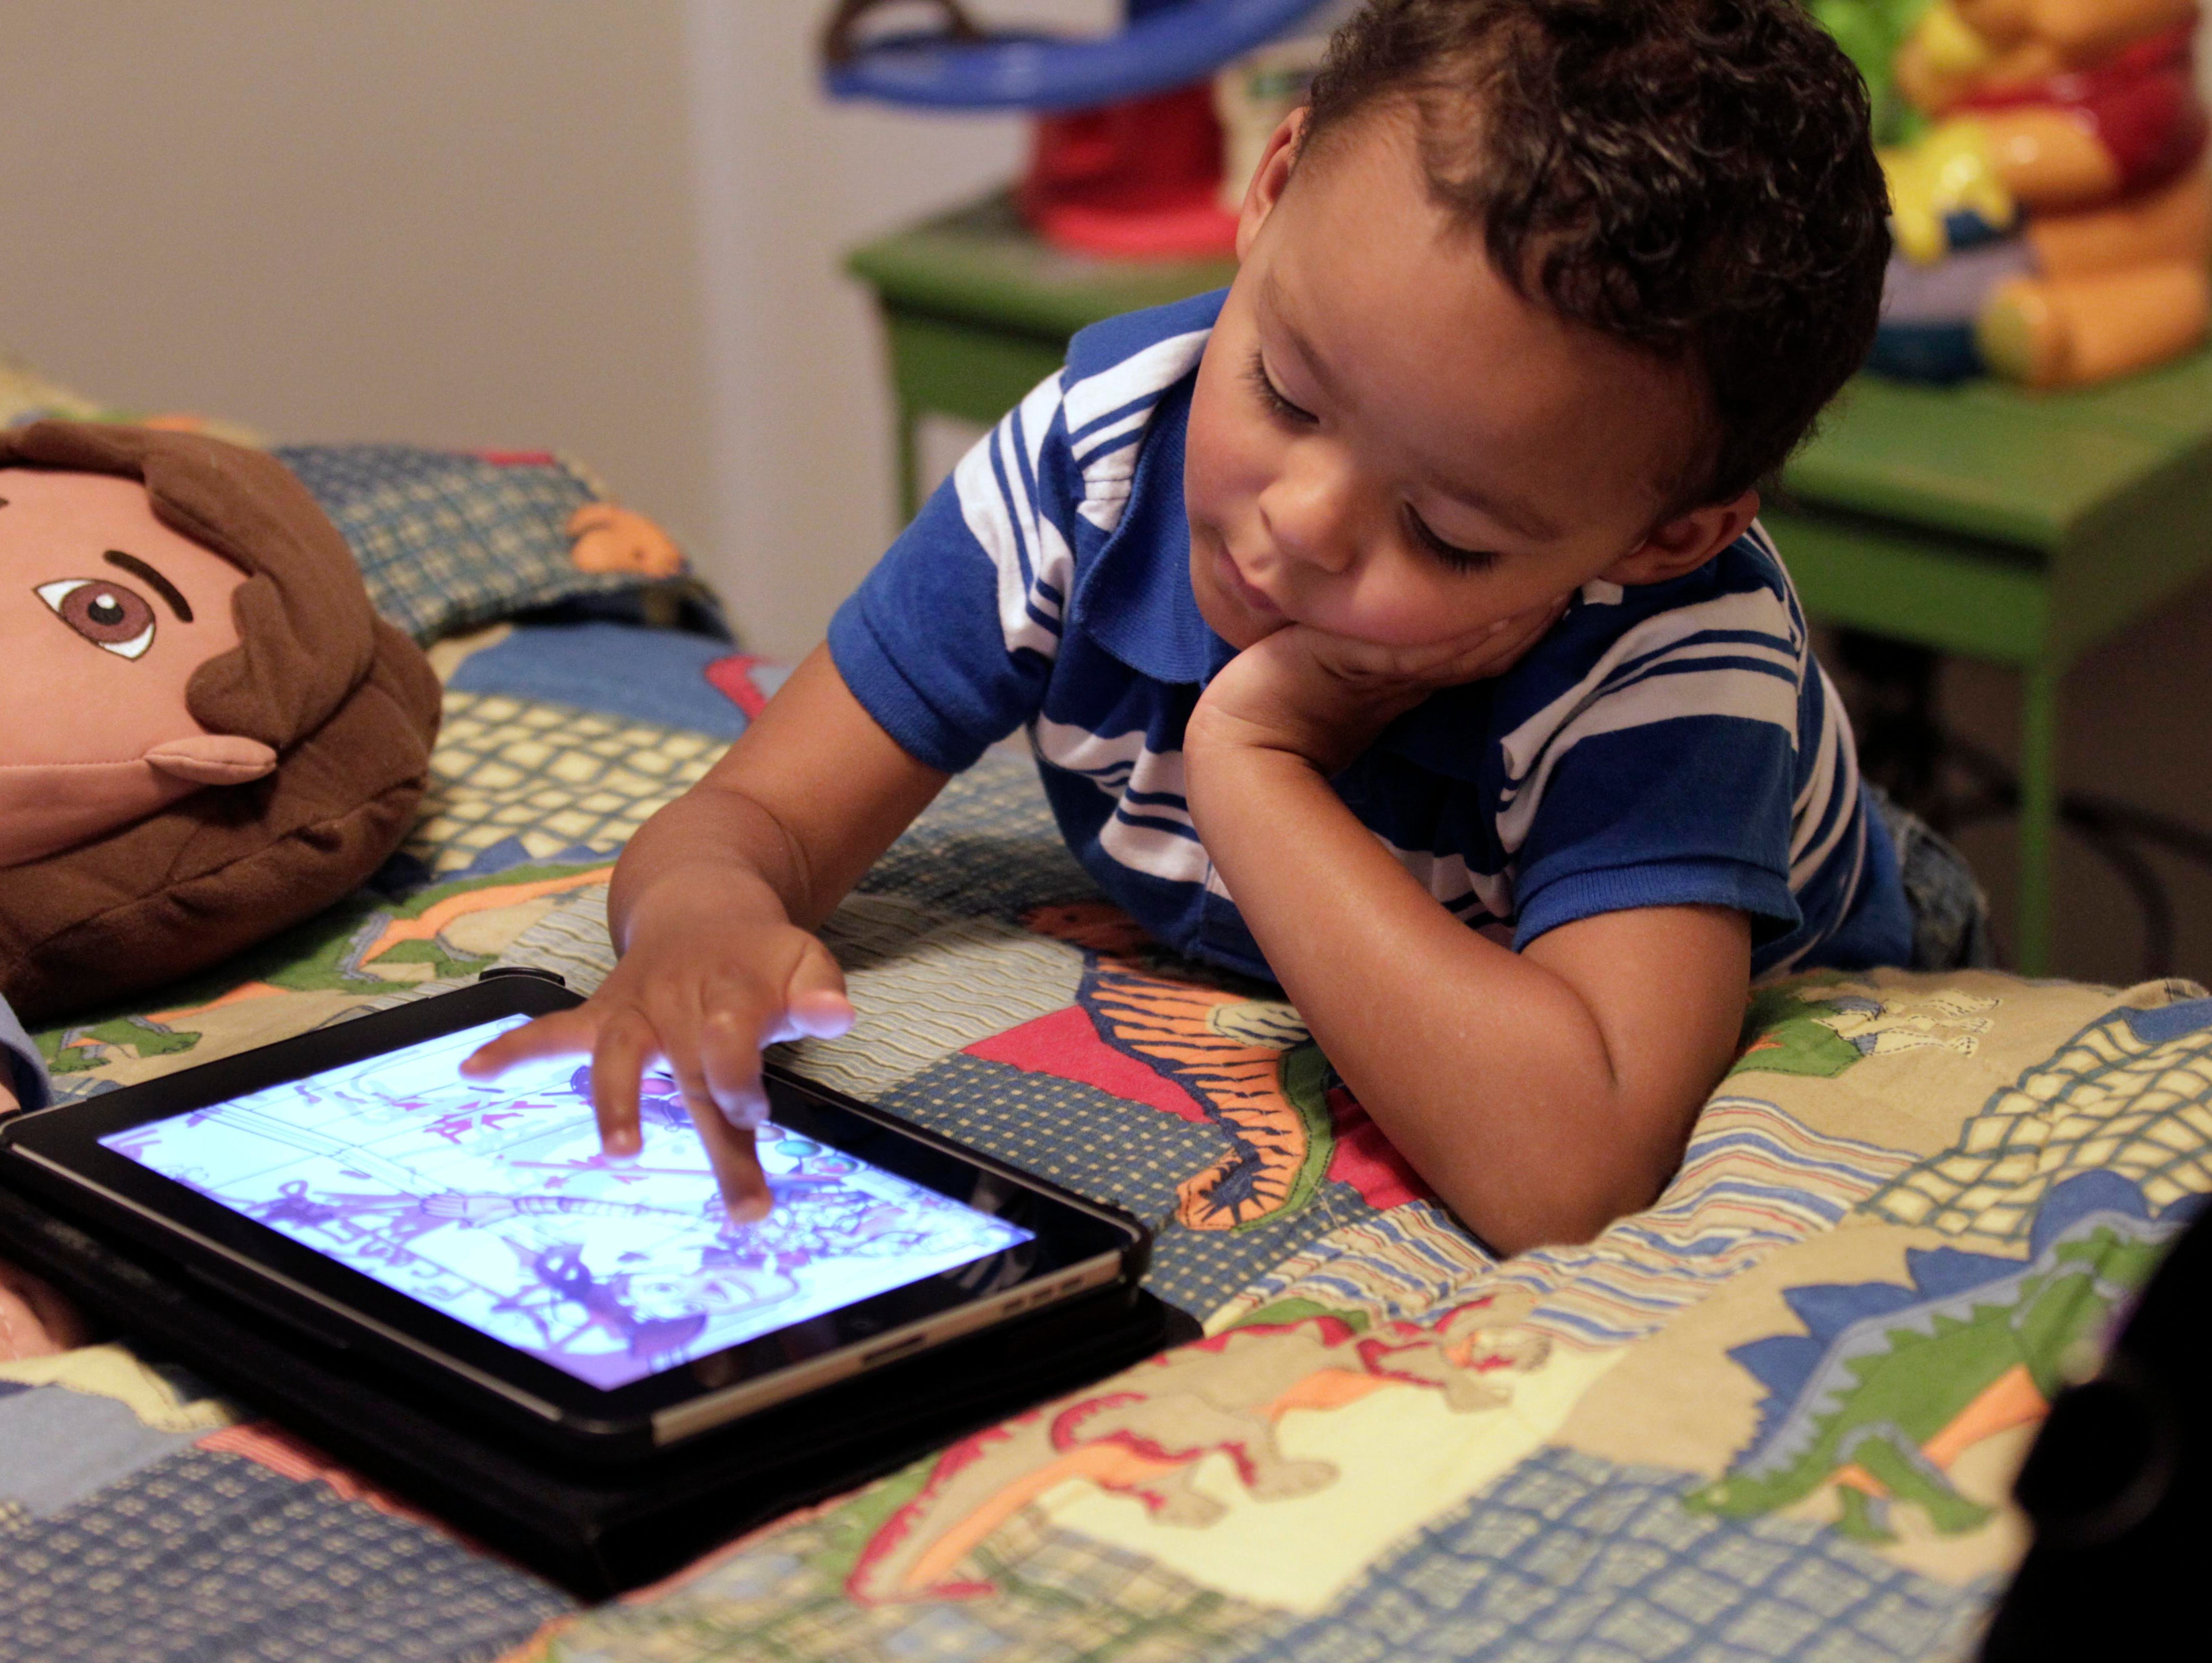 Frankie Thevenot, then 3, plays with an iPad in his bedroom at his home in Metairie, La., in 2011.